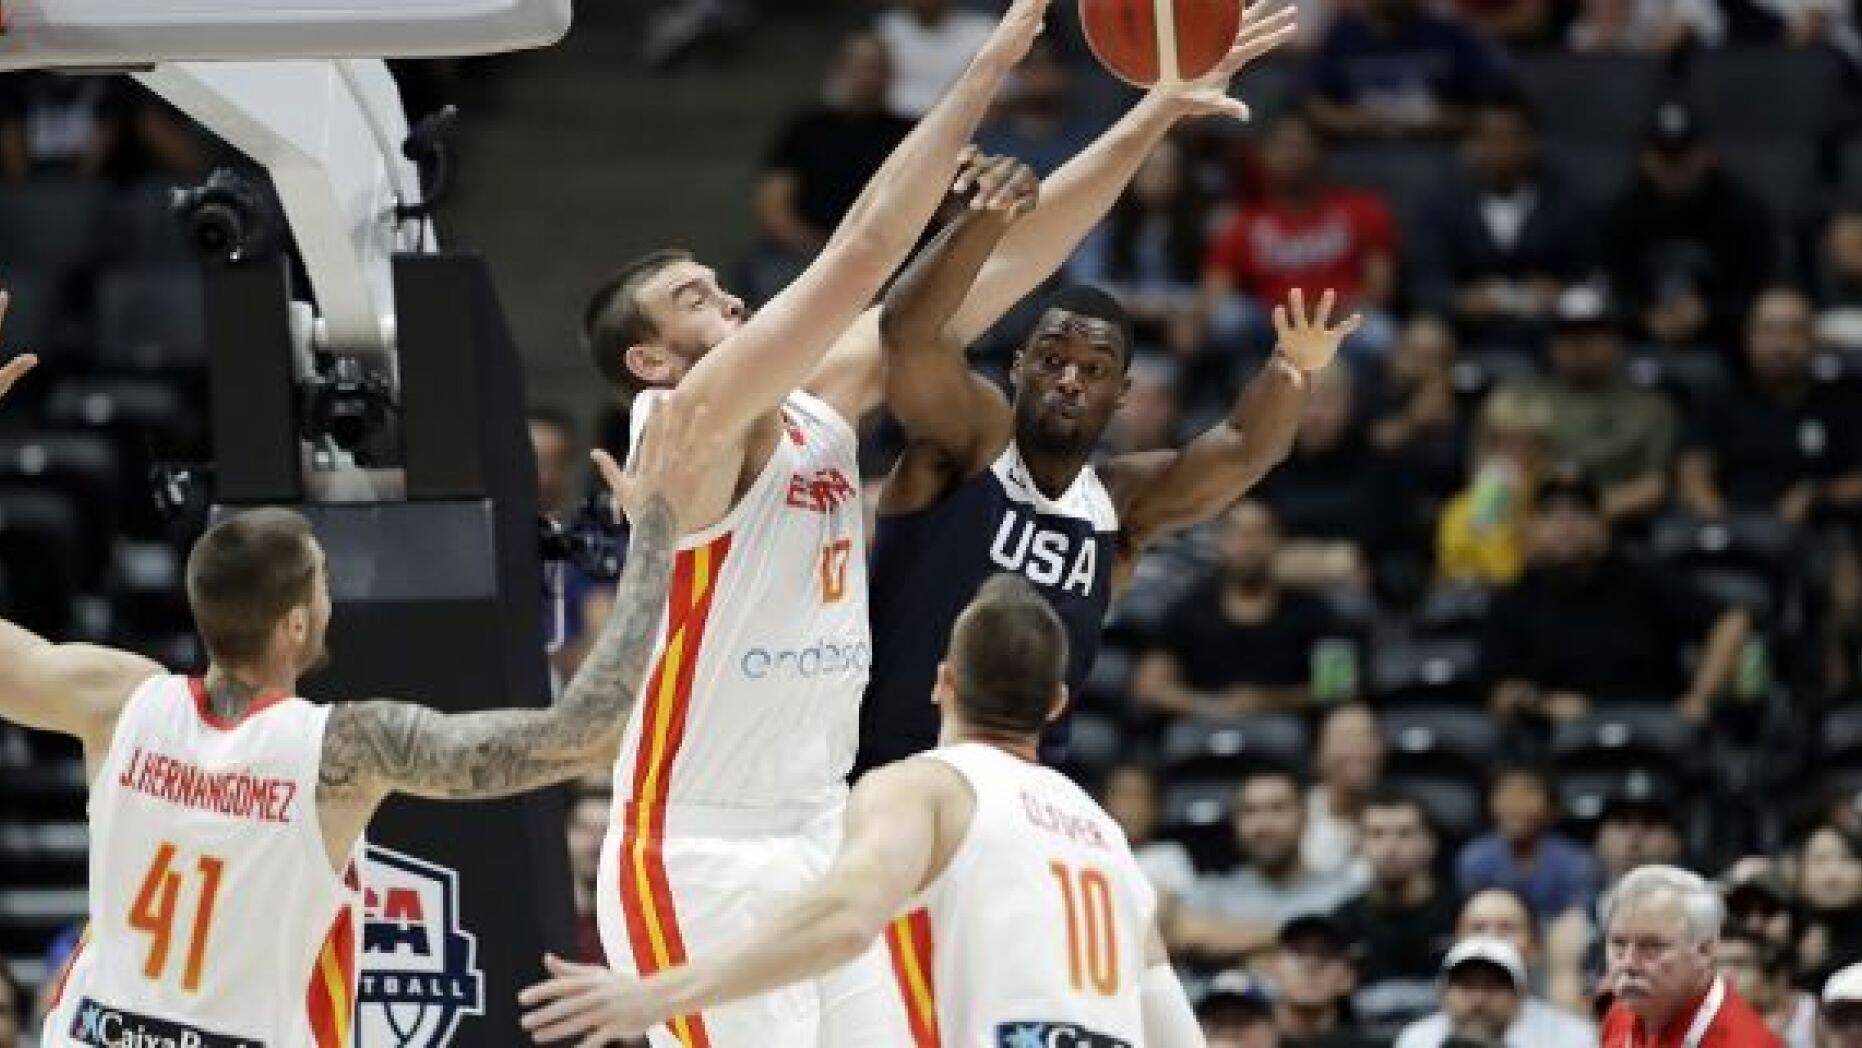 United States' Harrison Barnes, center right, is defended by Spain's Marc Gasol, center left, during the first half of an exhibition basketball game Friday, Aug. 16, 2019, in Anaheim, Calif. (AP Photo/Marcio Jose Sanchez)